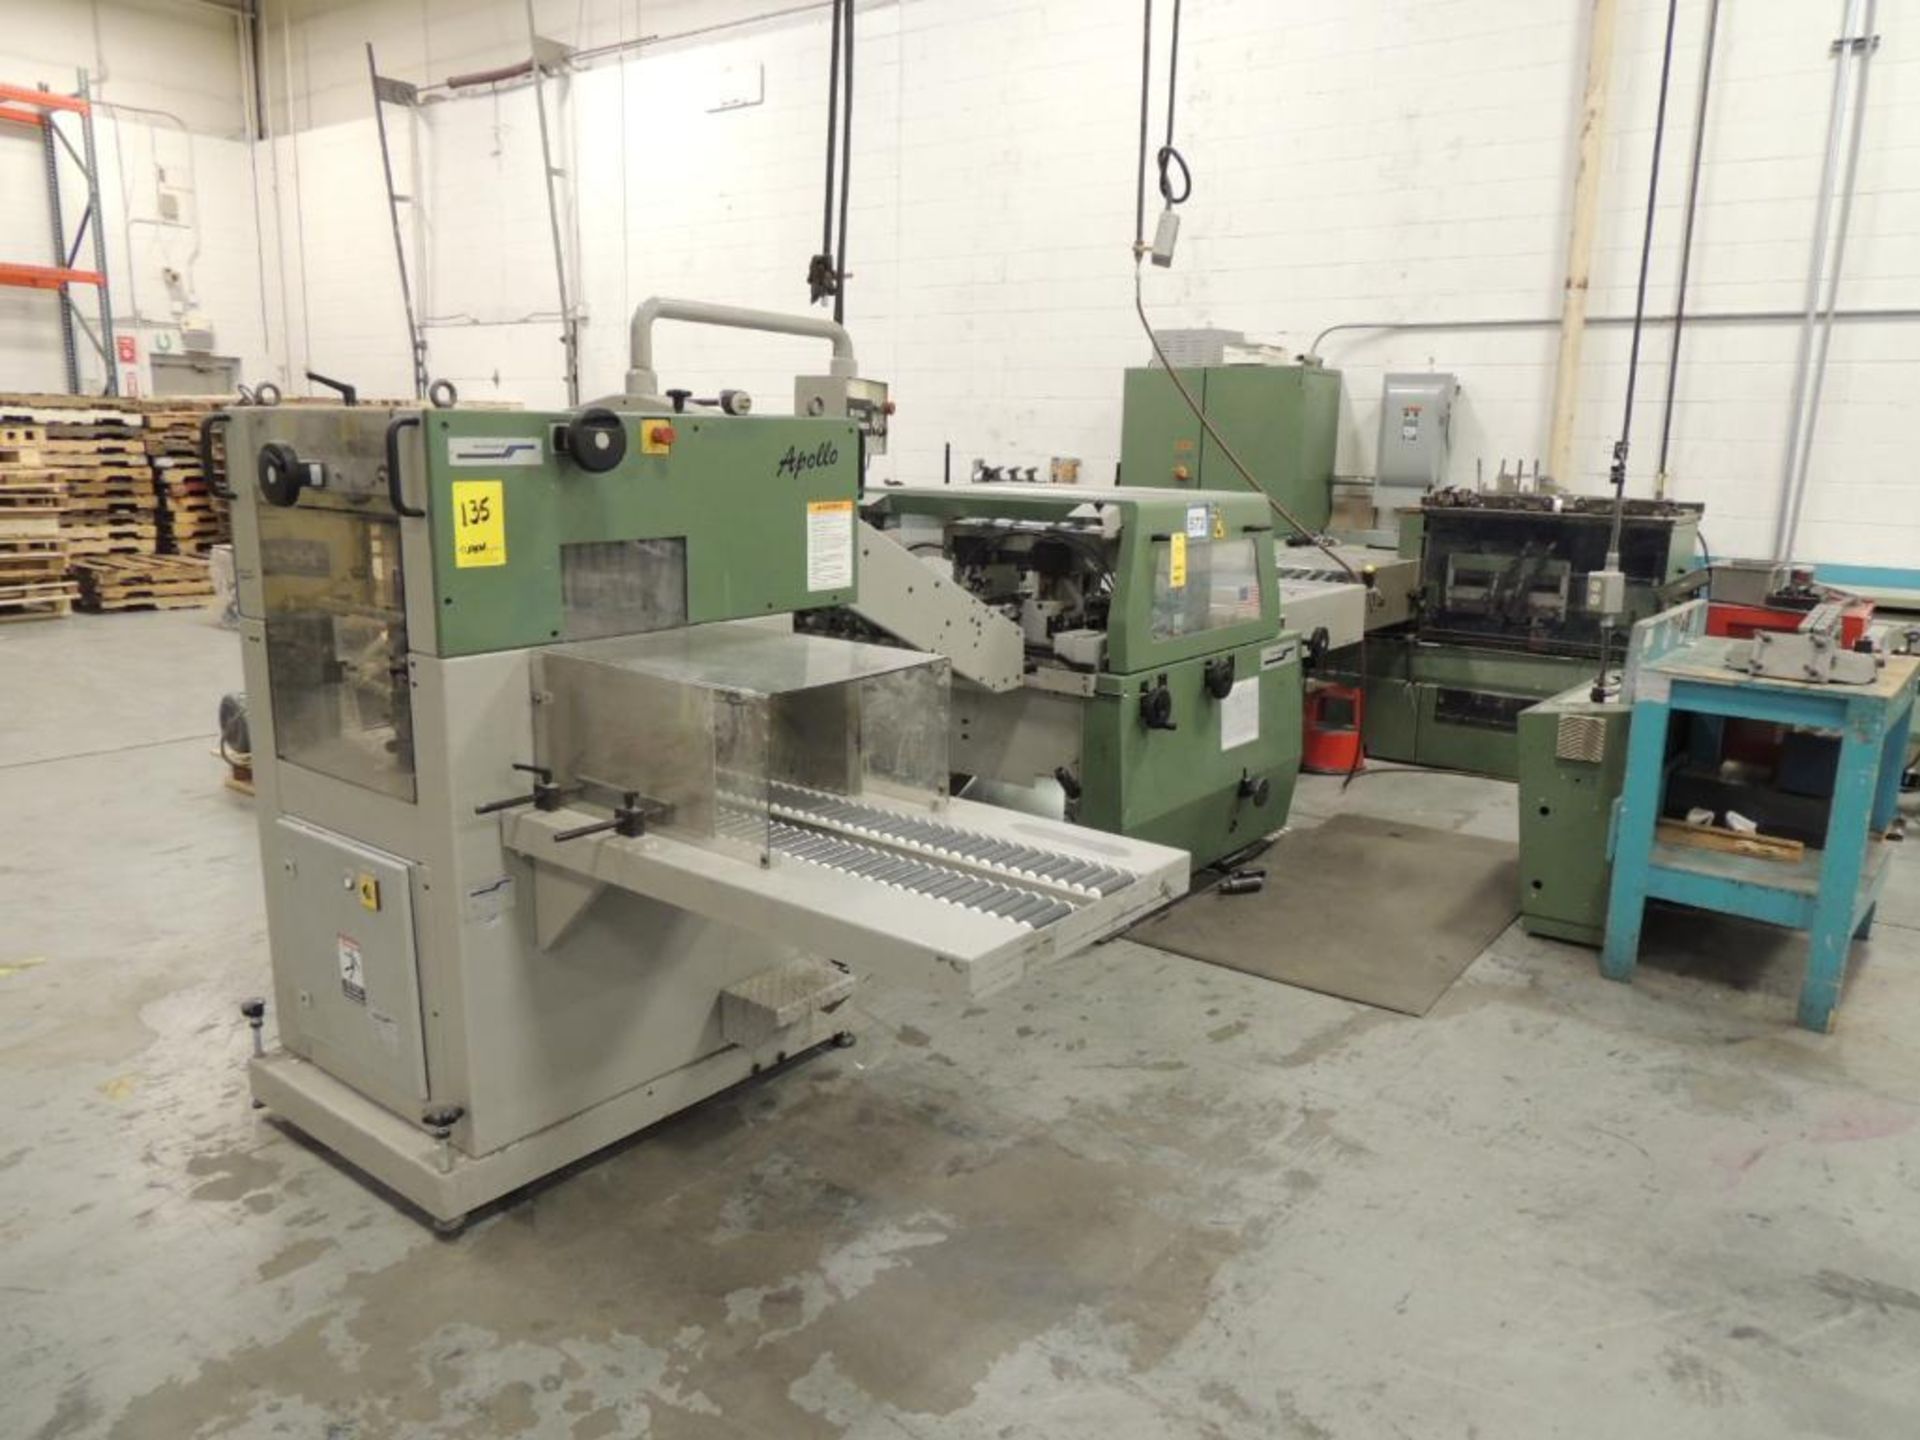 LOT: Muller Martini 335 Saddle Stitcher. Configured With 4-Pocket Collating Type 0306.400, New In 19